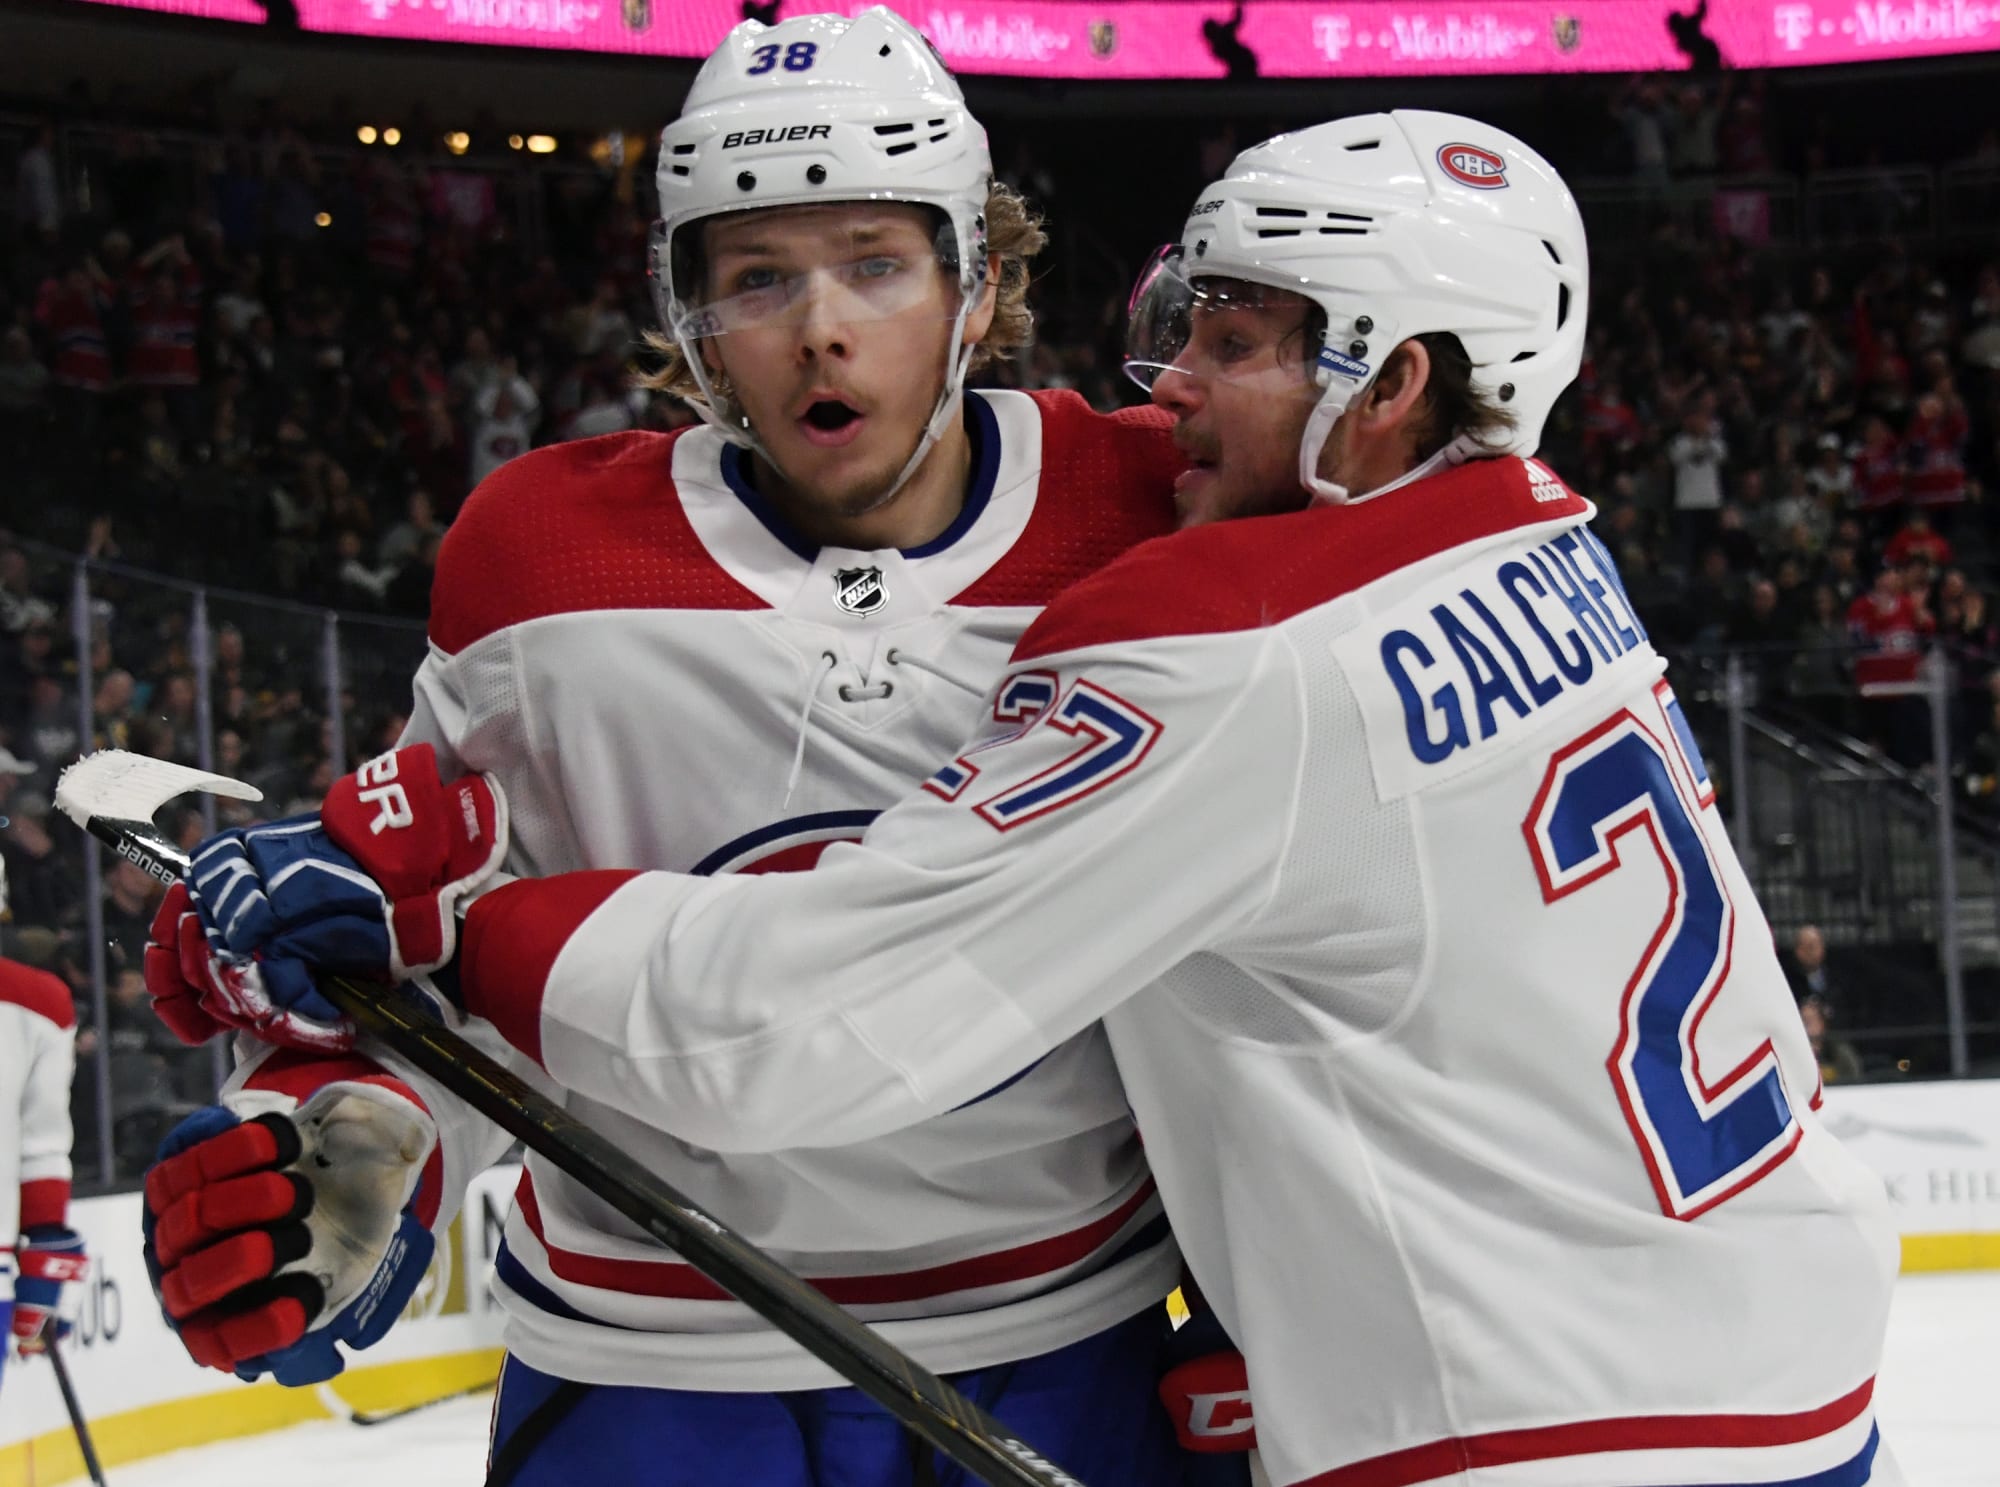 Montreal Canadiens: The best time to try new things